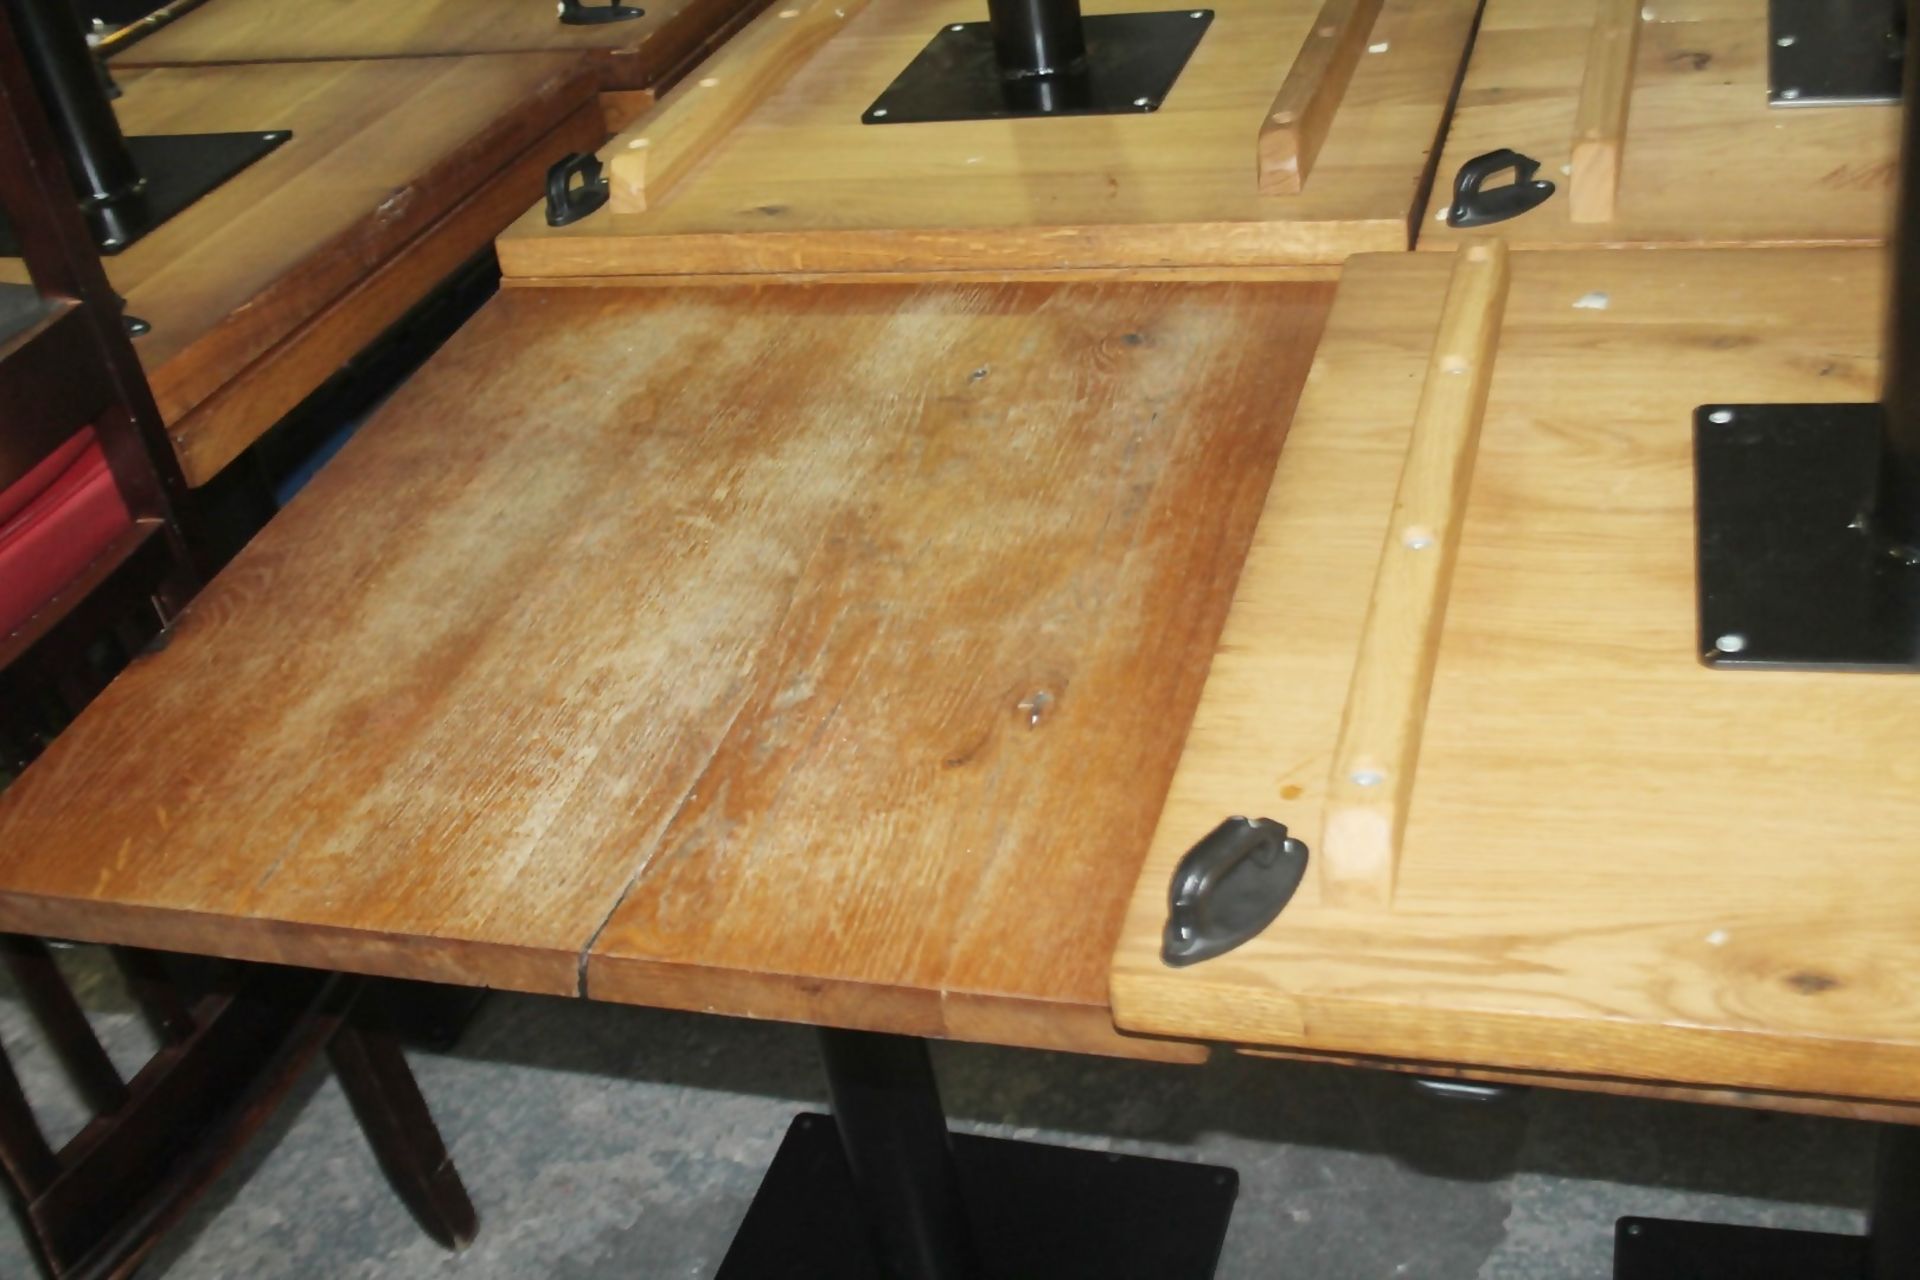 4 x Solid Oak Restaurant Dining Tables - Natural Rustic Knotty Oak Tops With Black Cast Iron Bases - - Image 5 of 7